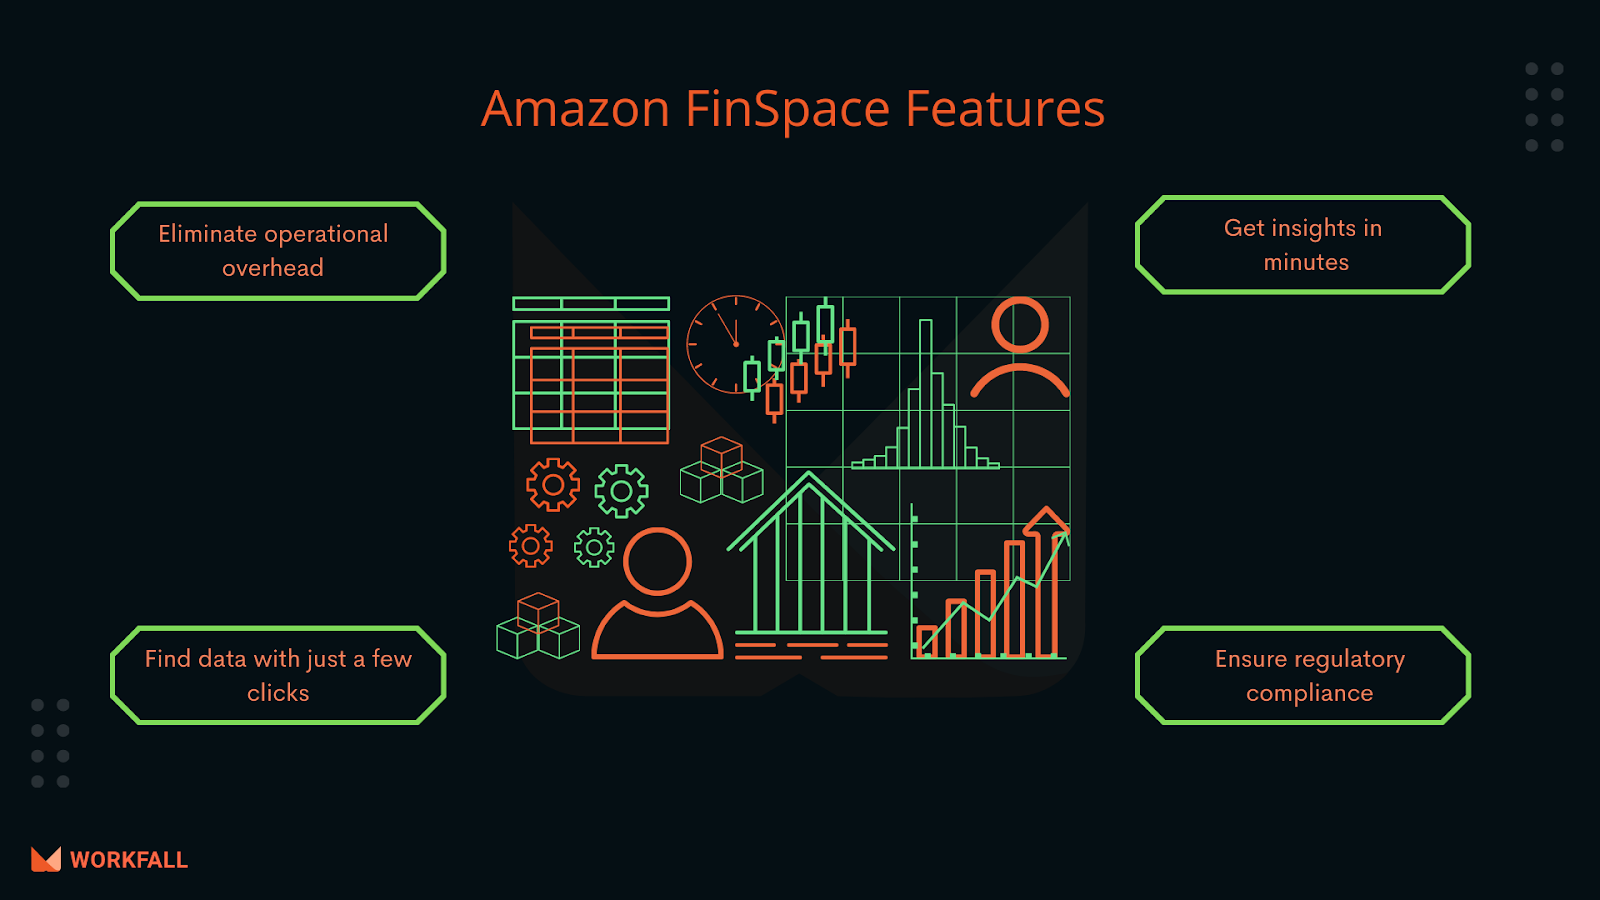 Features of Amazon FinSpace